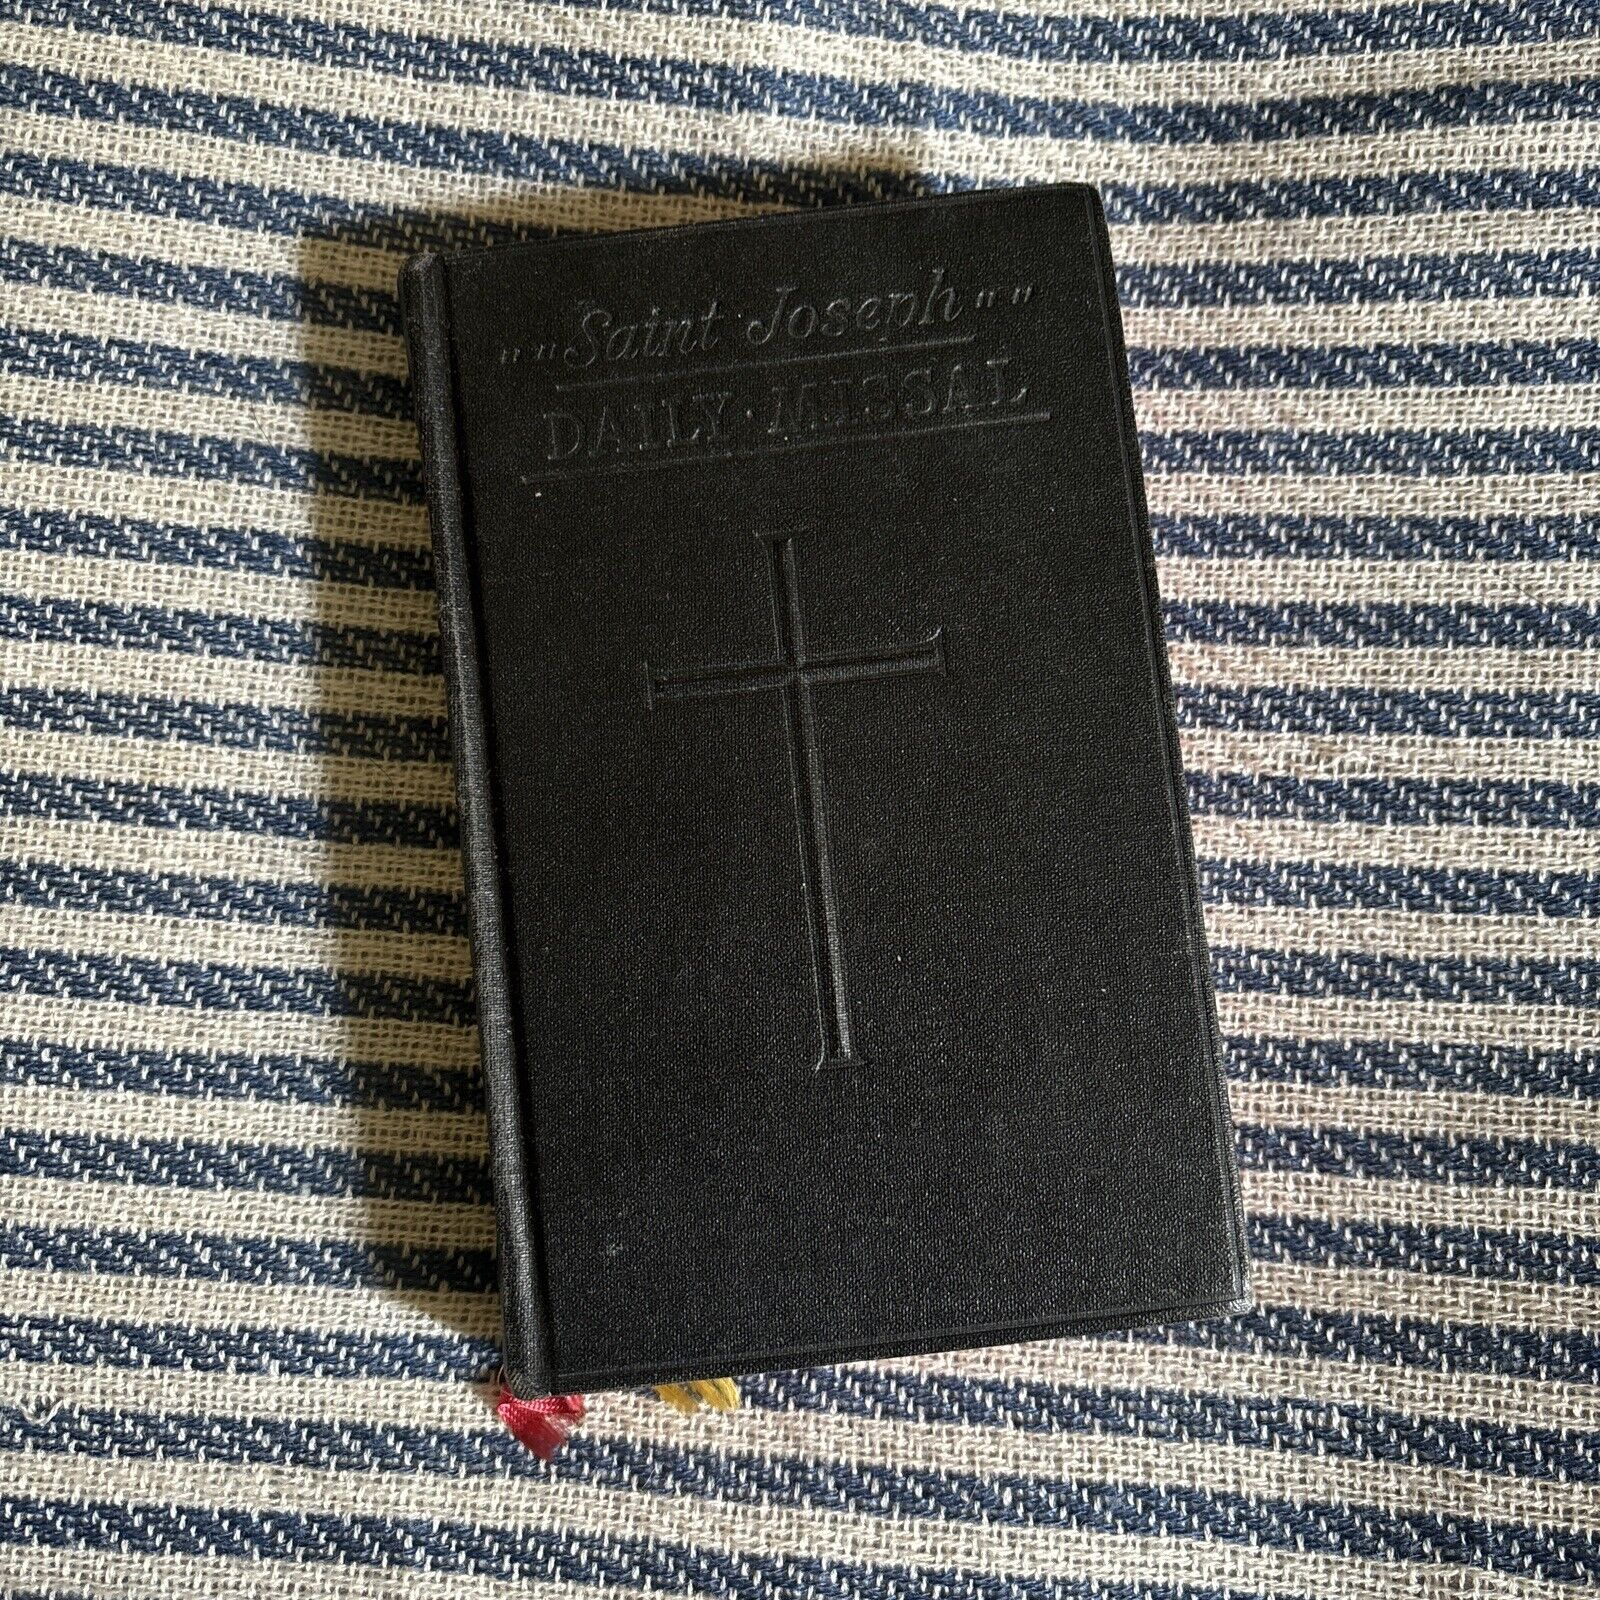 Vintage 1962 To 1958 St. Joseph Daily Missal Confraternity Version